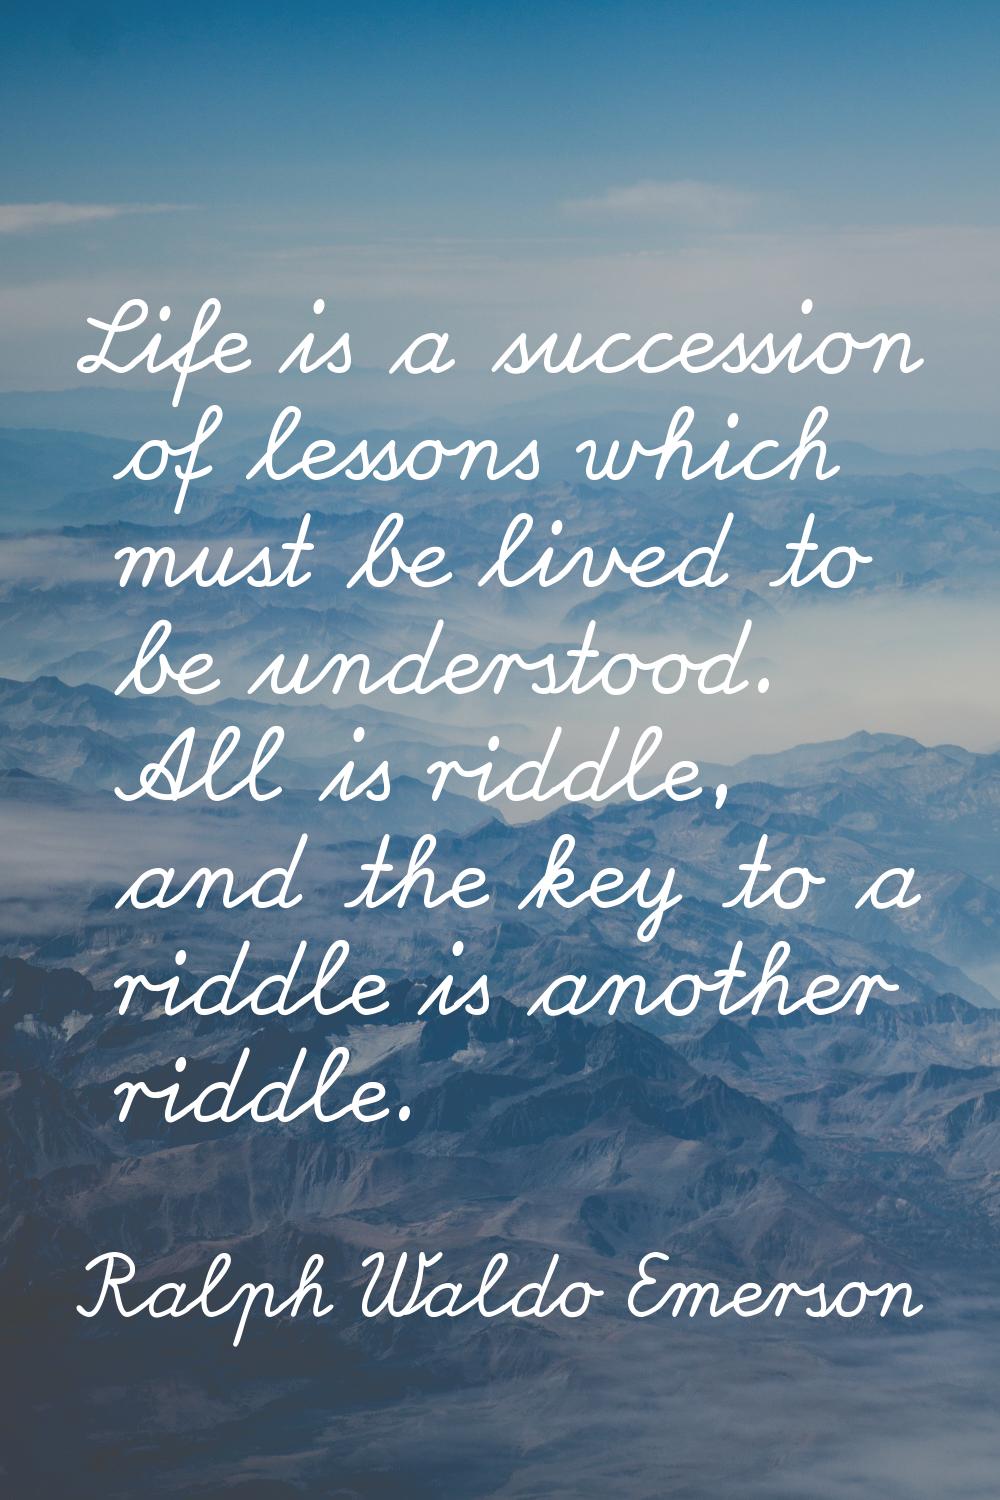 Life is a succession of lessons which must be lived to be understood. All is riddle, and the key to